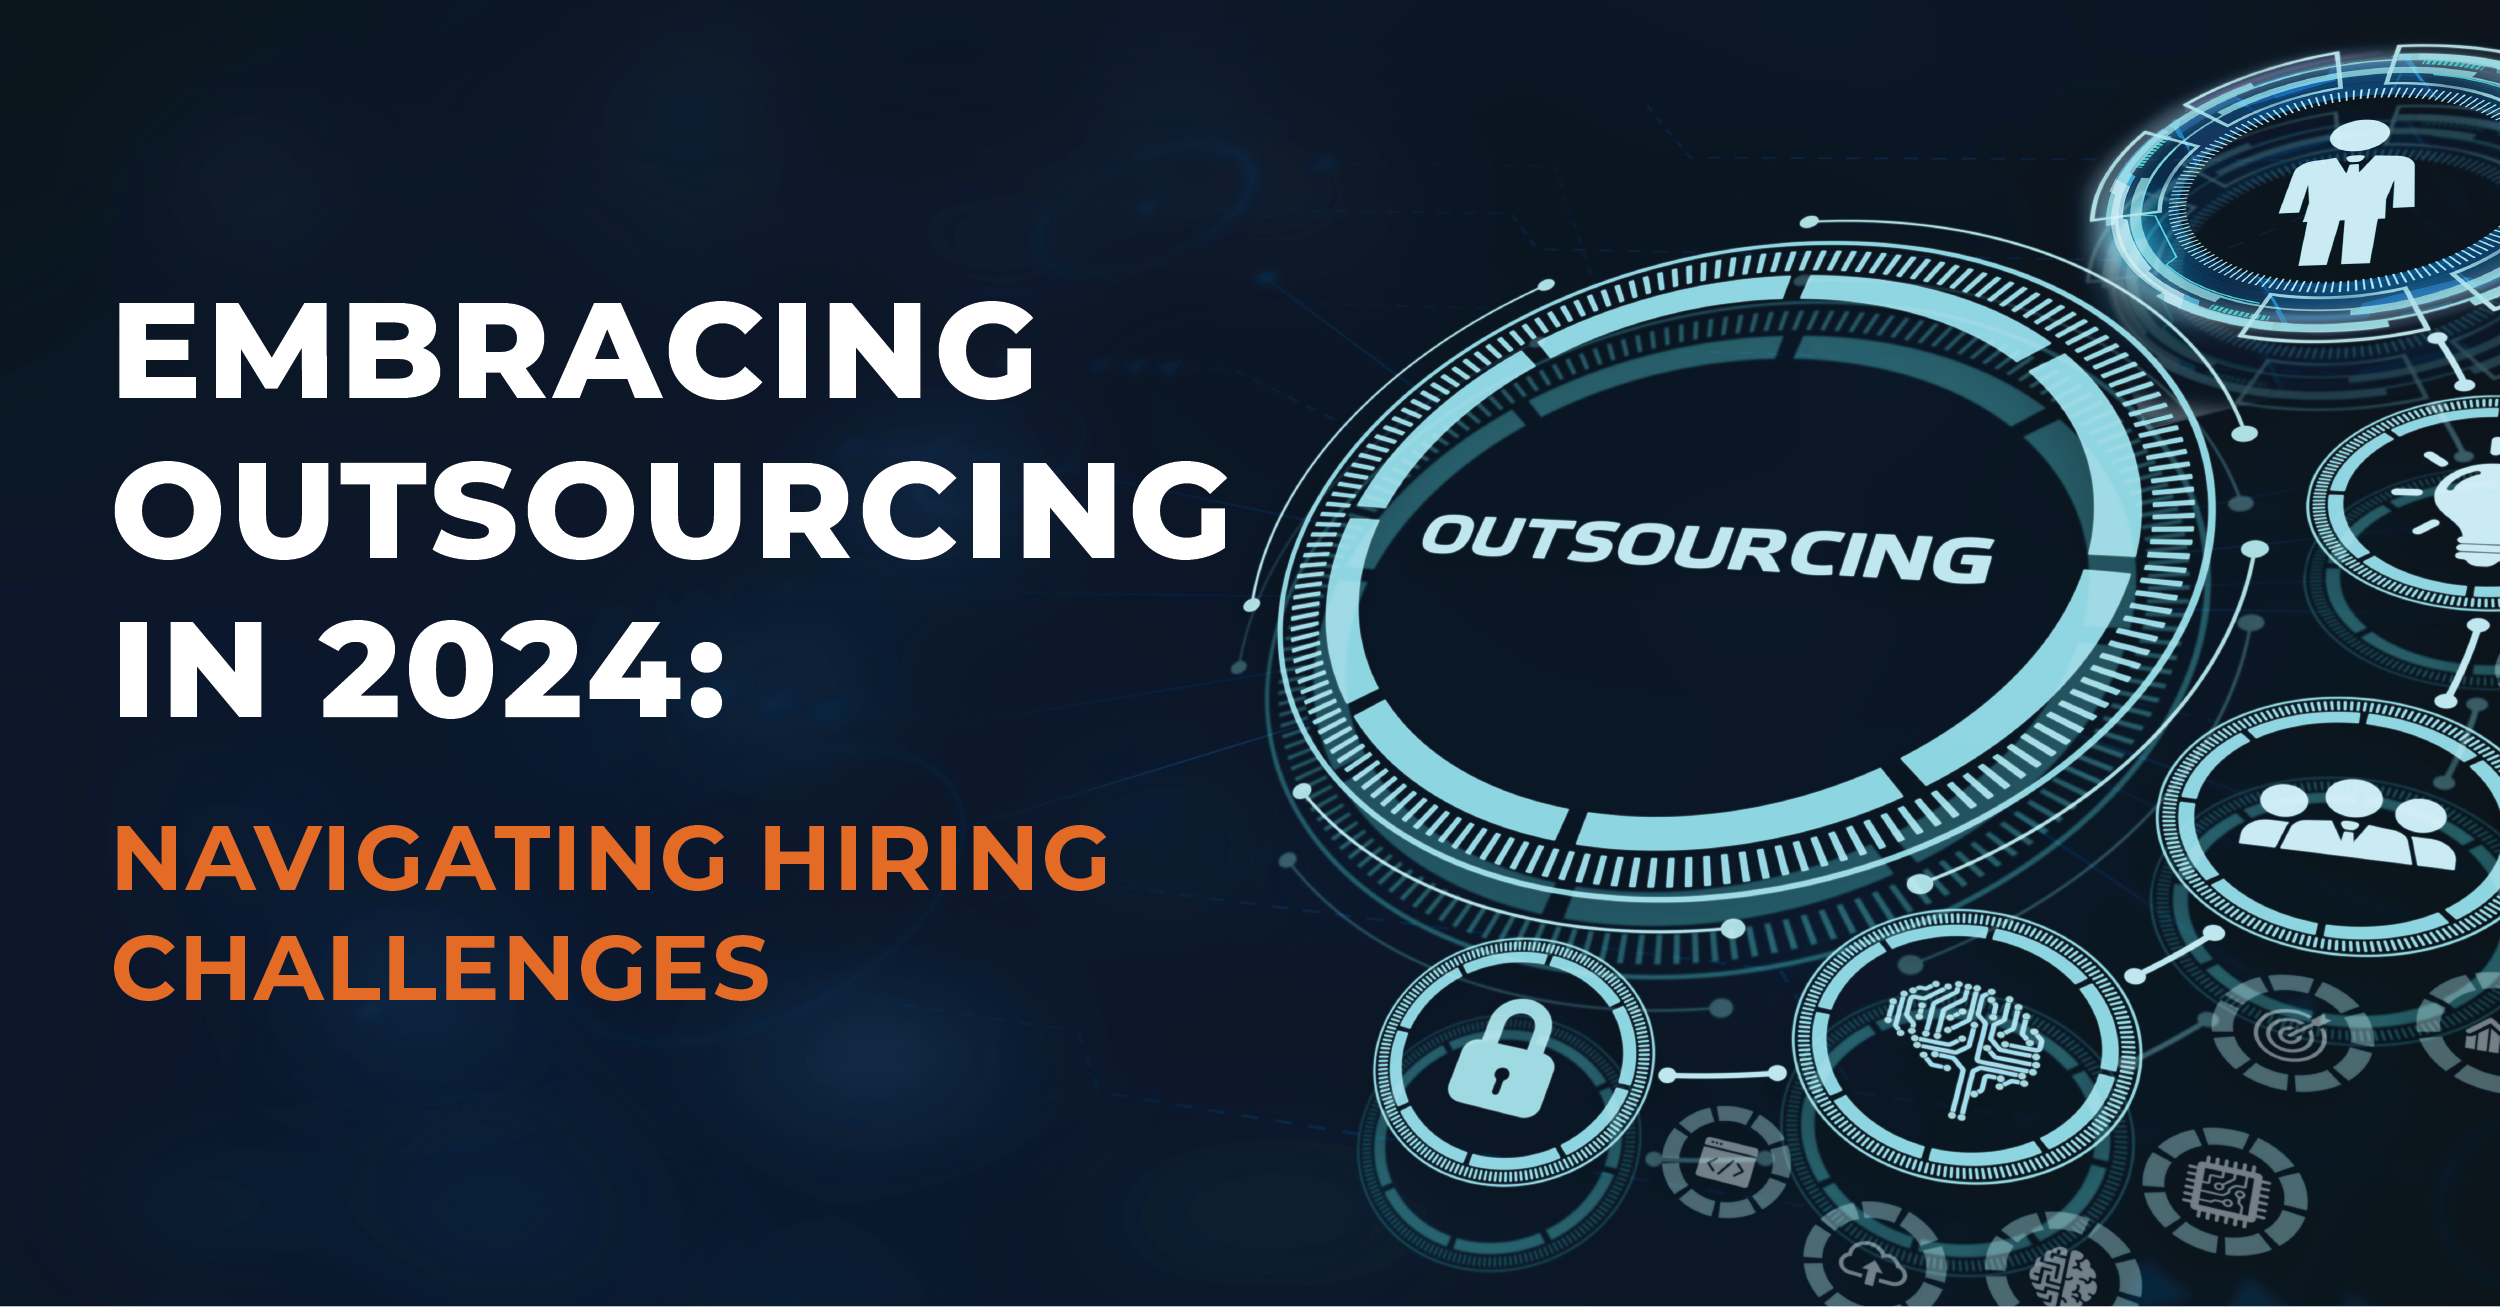 Embracing Outsourcing in 2024: Navigating Hiring Challenges